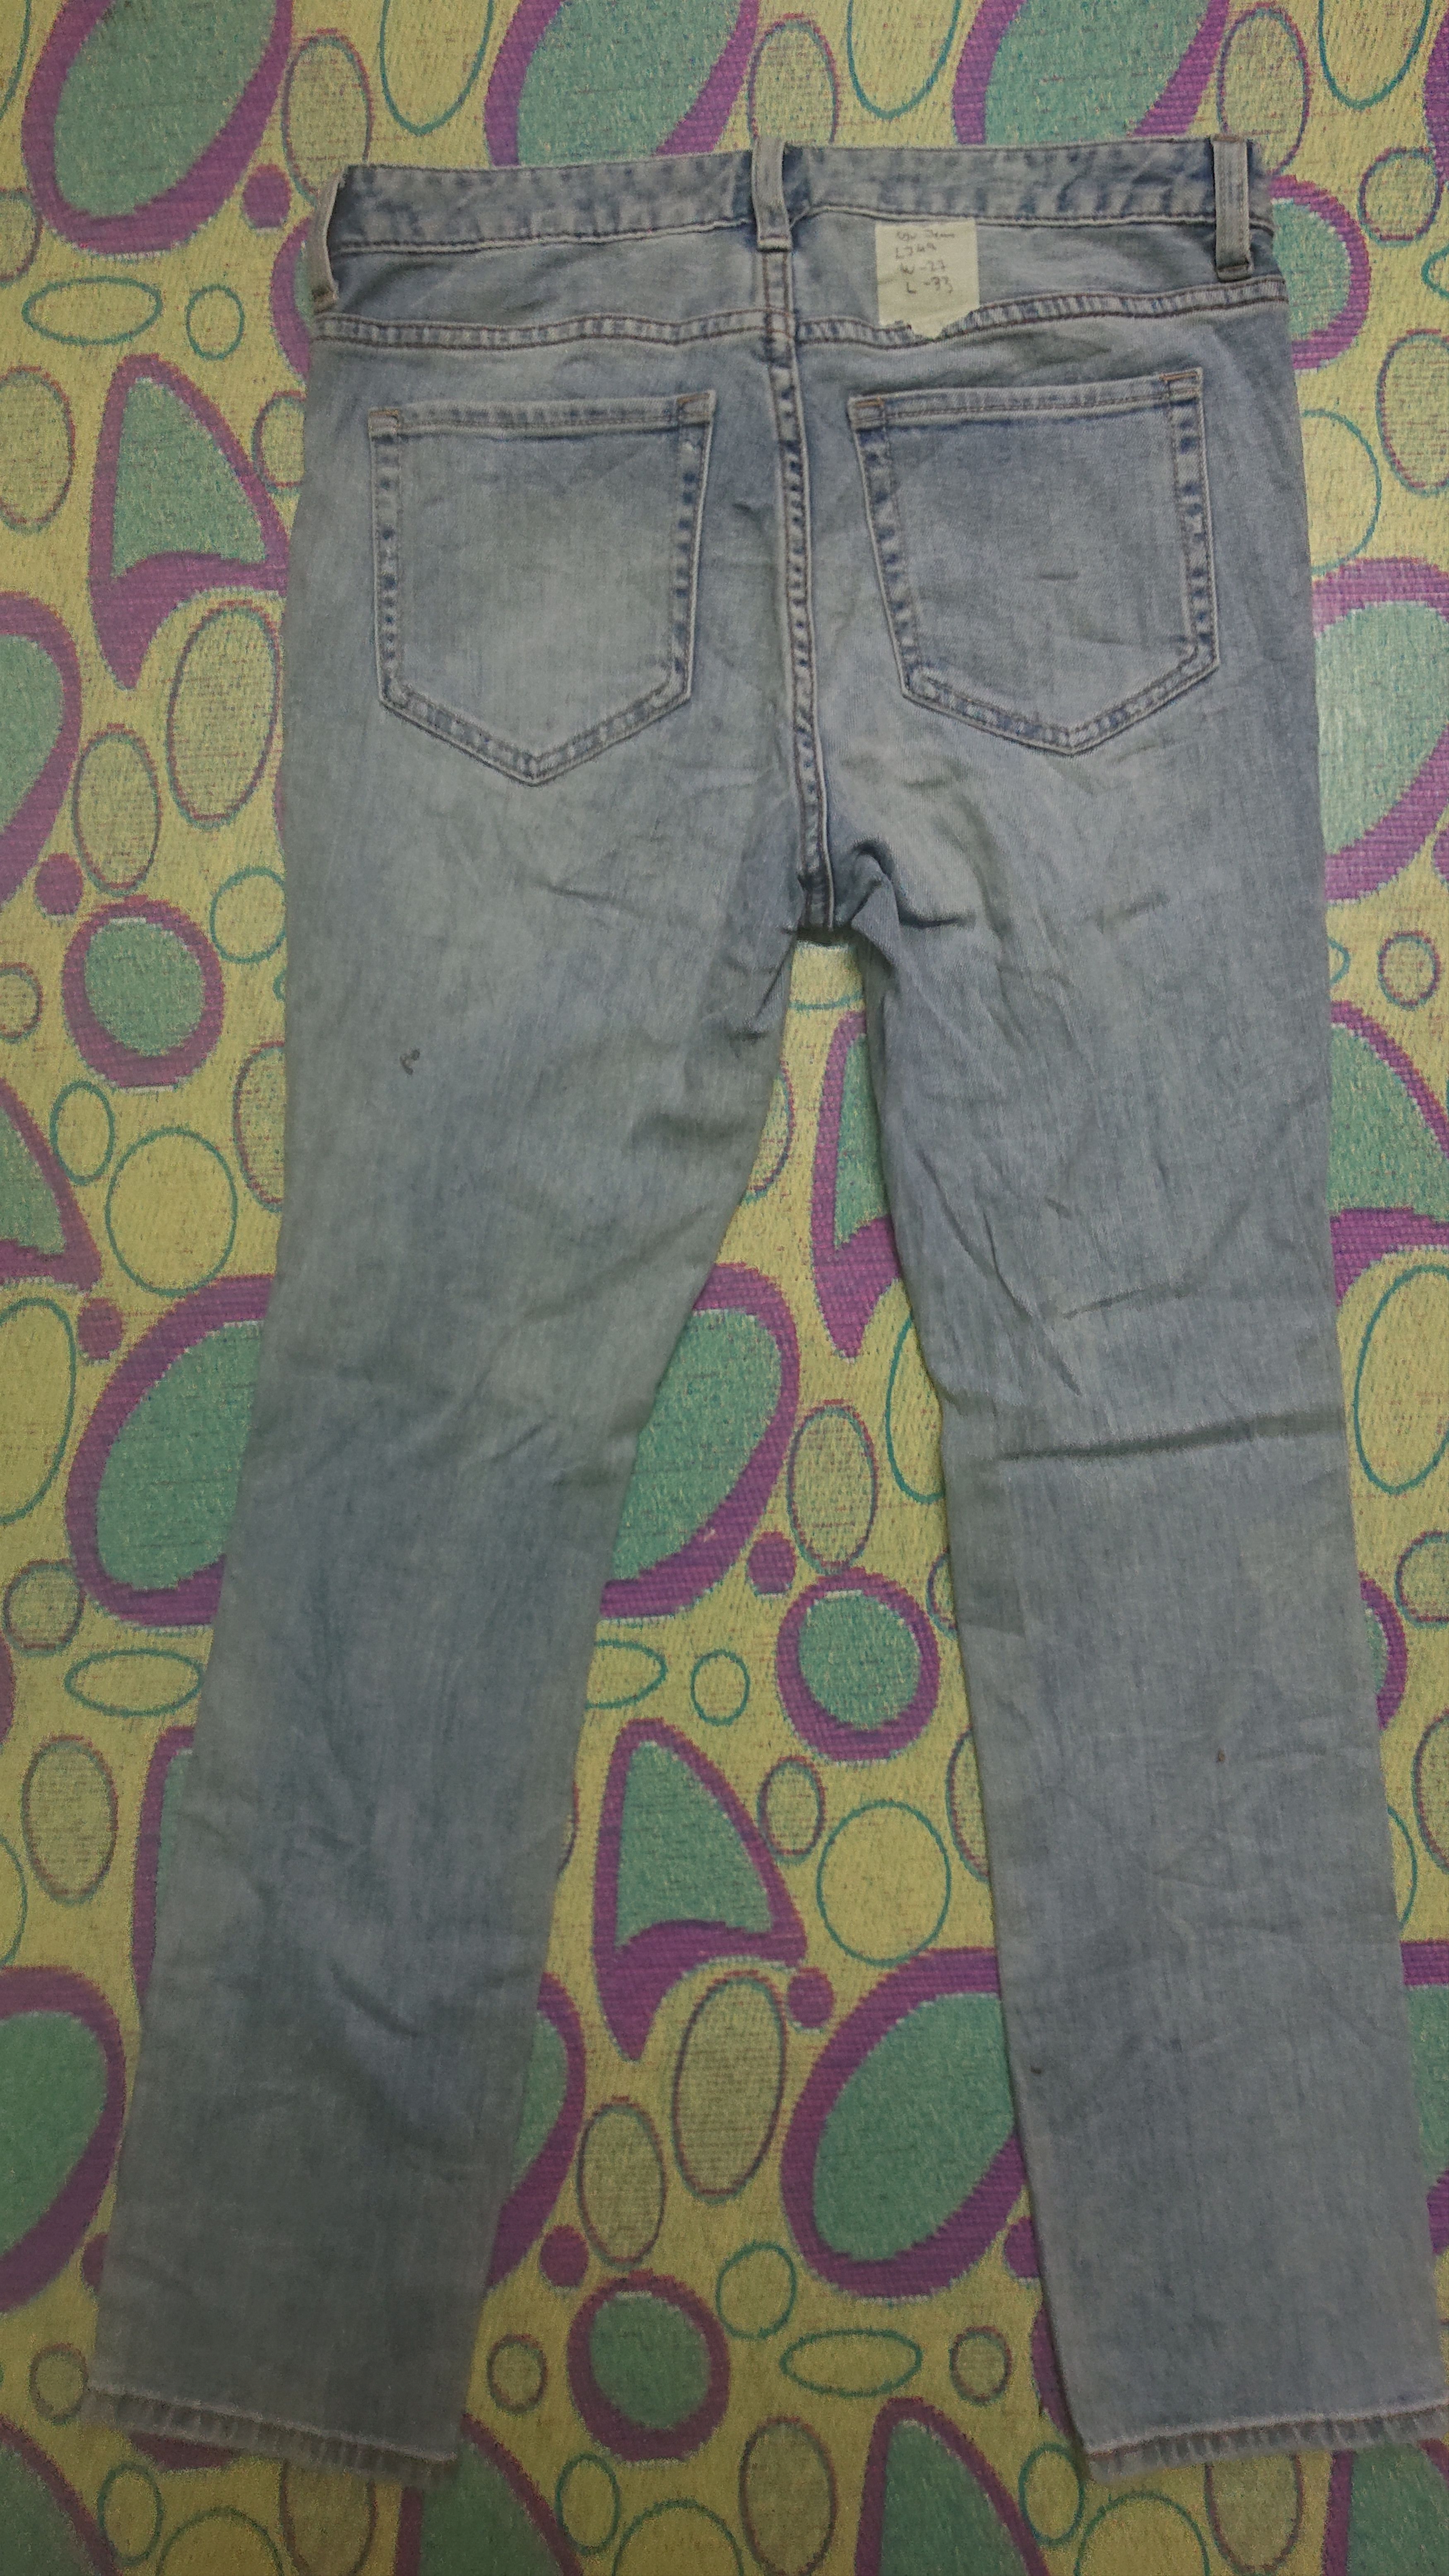 Vintage gu jeans made in japan Size 27" / US 4 / IT 40 - 2 Preview